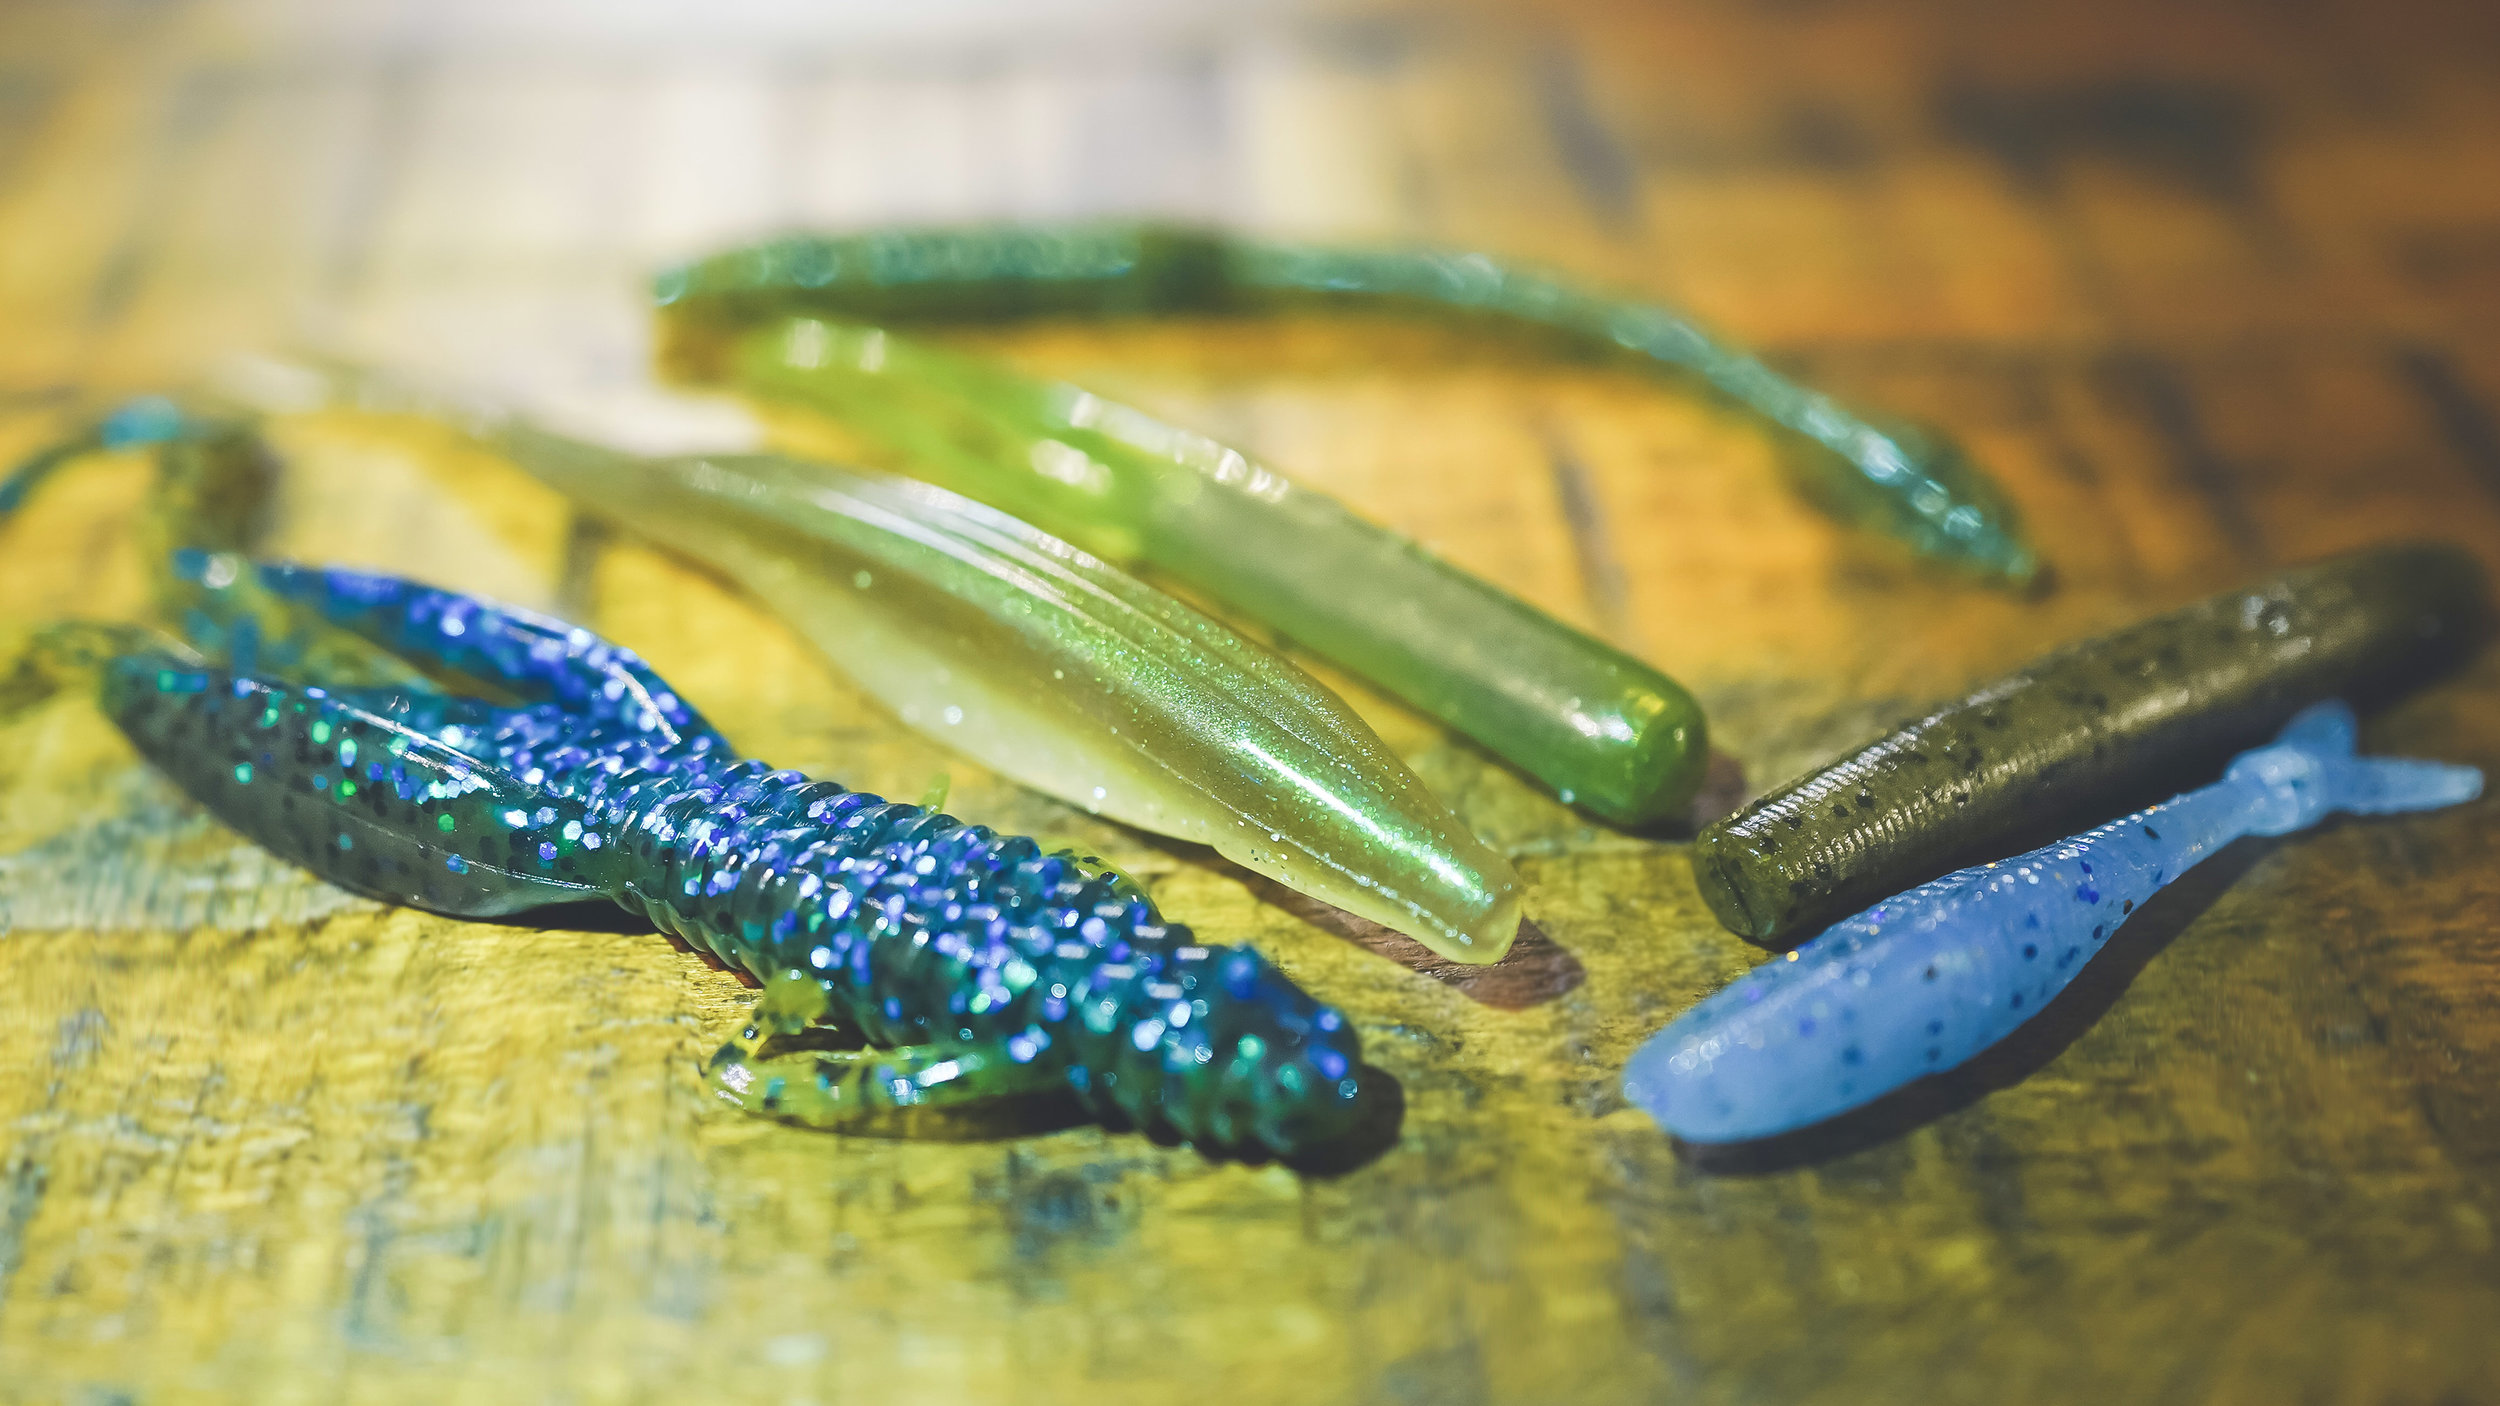 Best Worms and Creature Baits For Bass Fishing - Buyer's Guide